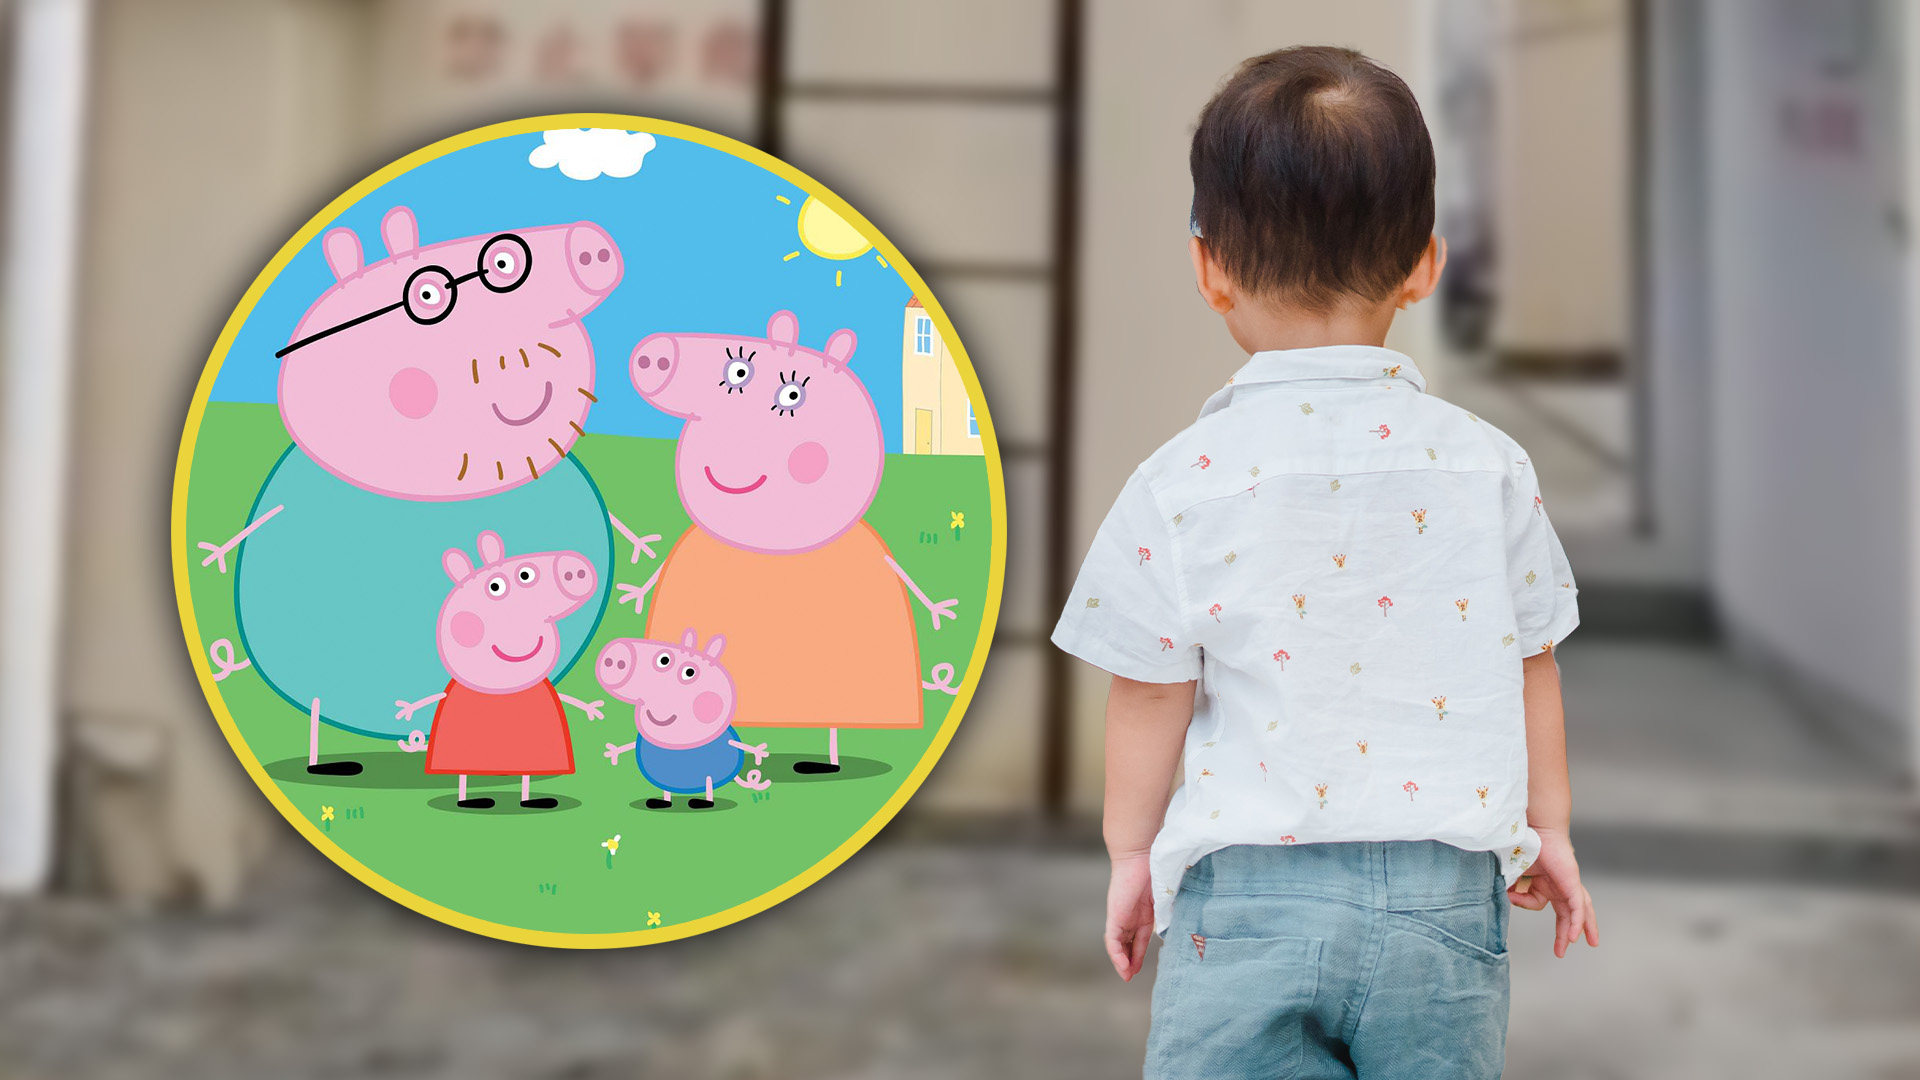 A quick-thinking police officer in China saved the day by playing the theme tune to a missing autistic child’s favourite cartoon, Peppa Pig, to locate the lost boy. Photo: SCMP composite/Shutterstock/Douyin/YouTube